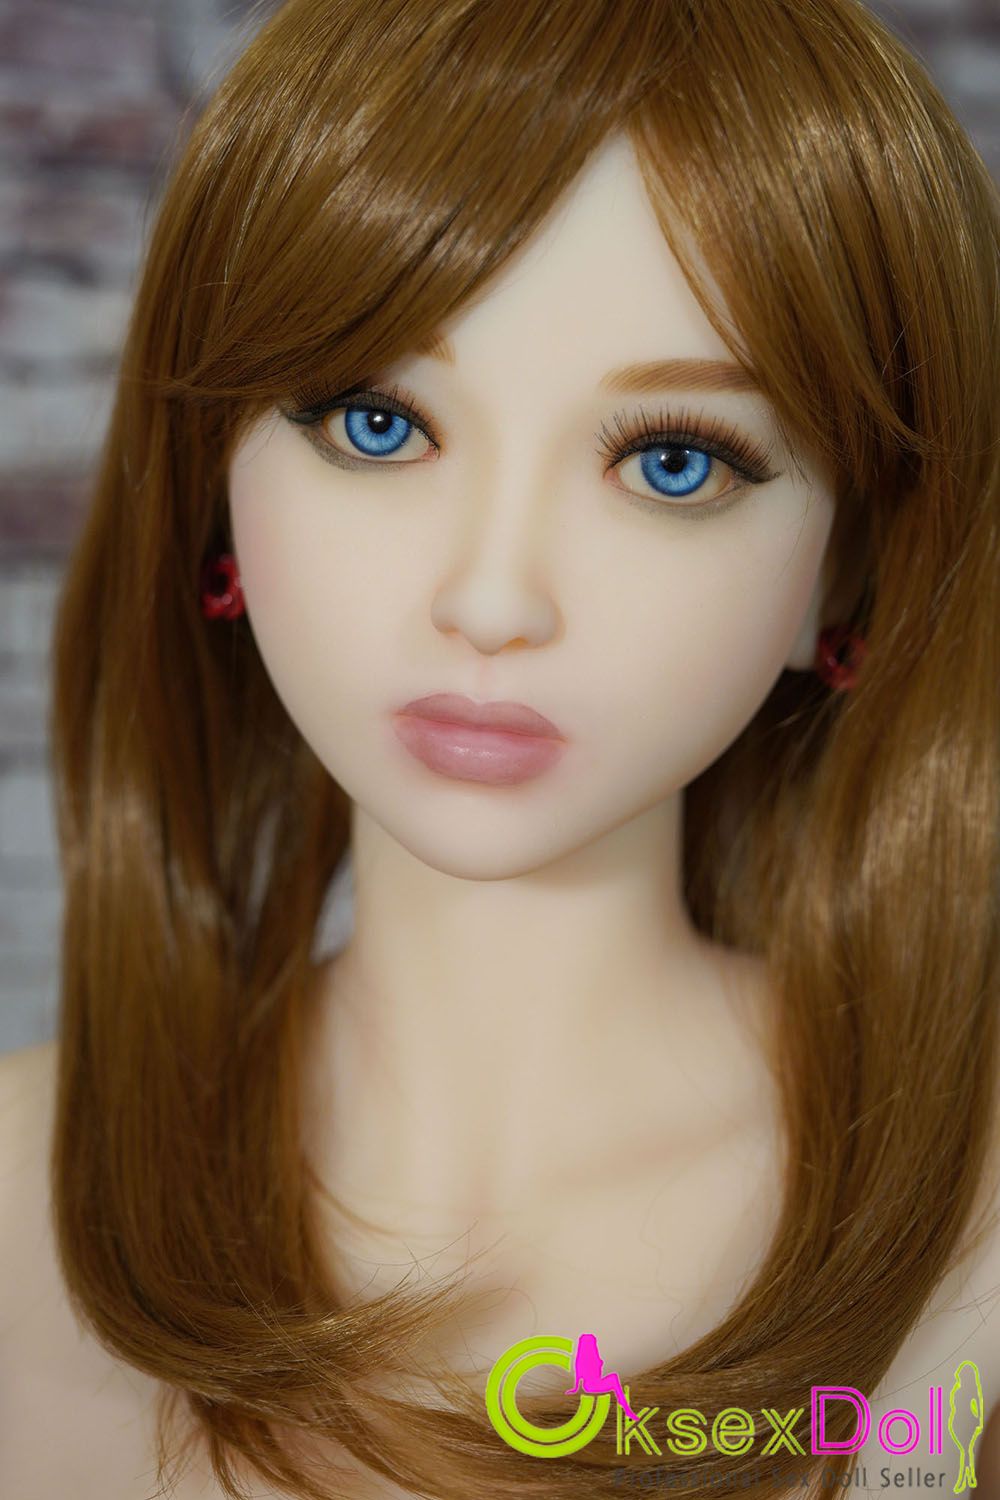 Dollforever Love Dolls Pictures